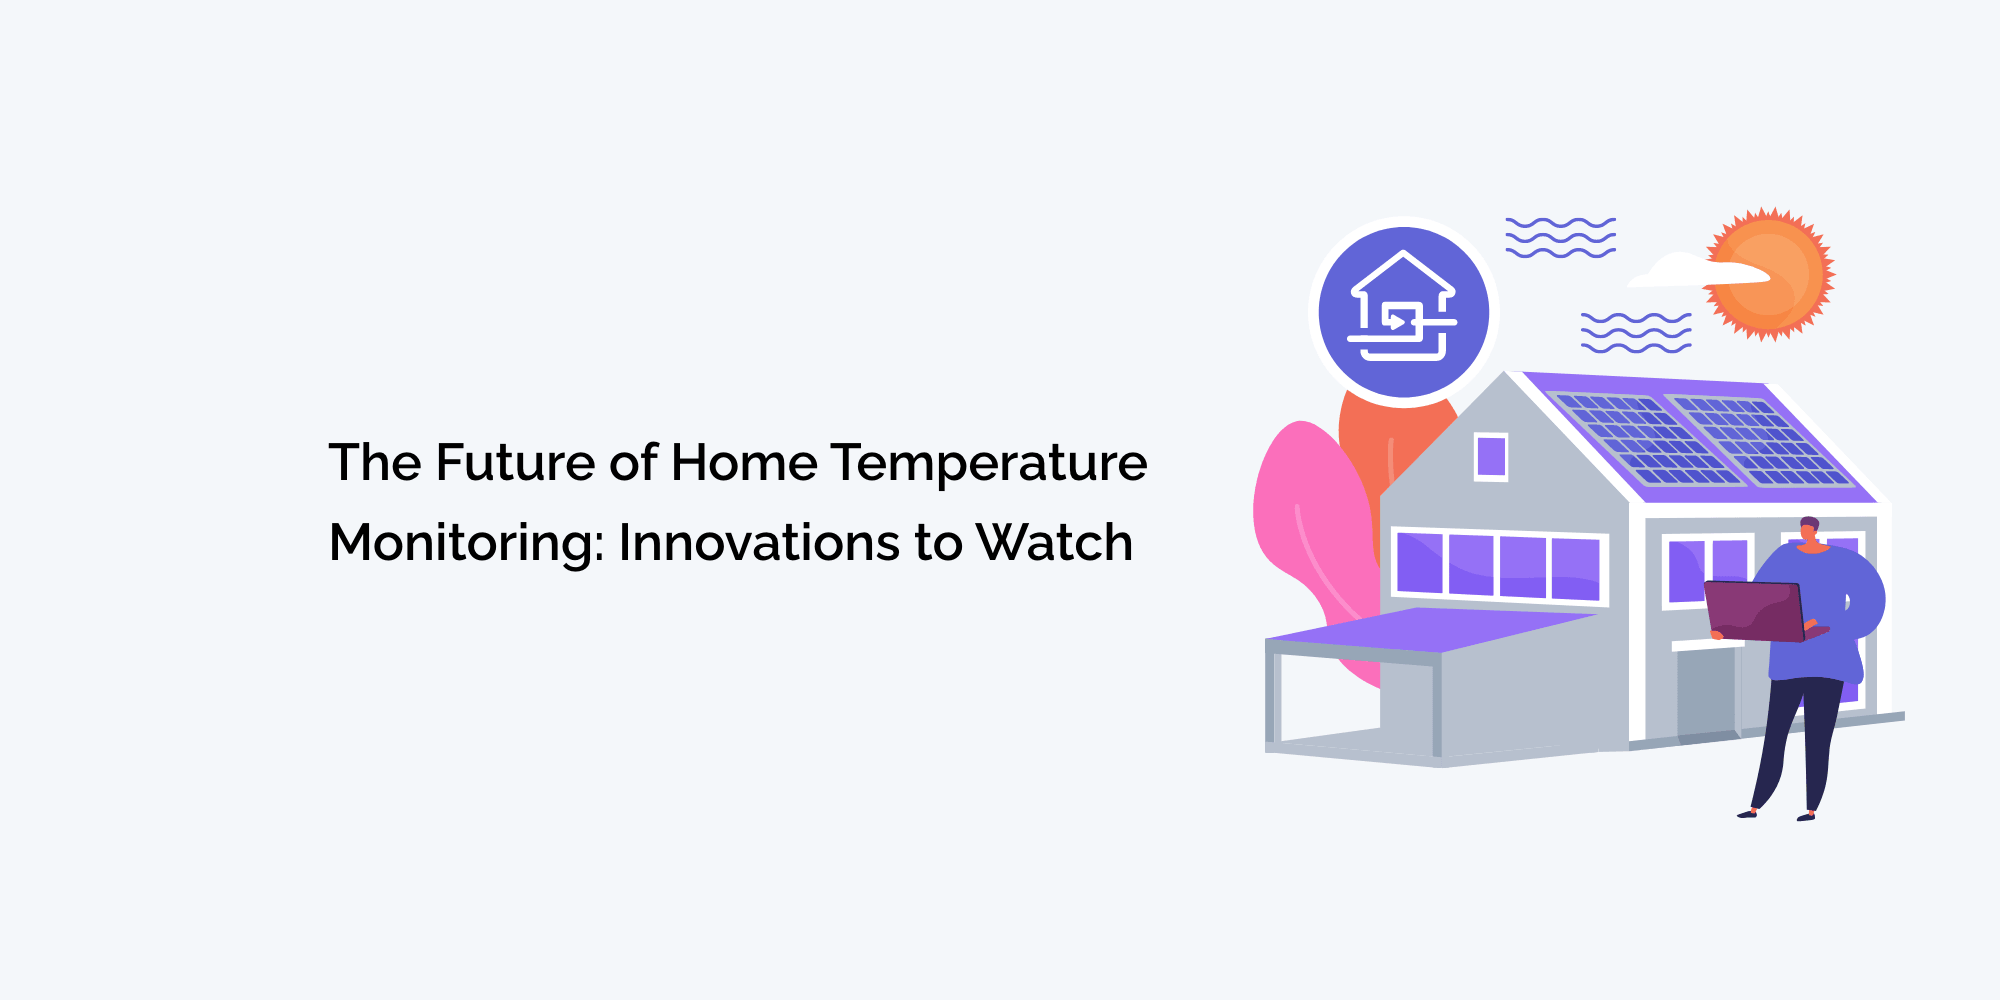 The Future of Home Temperature Monitoring: Innovations to Watch